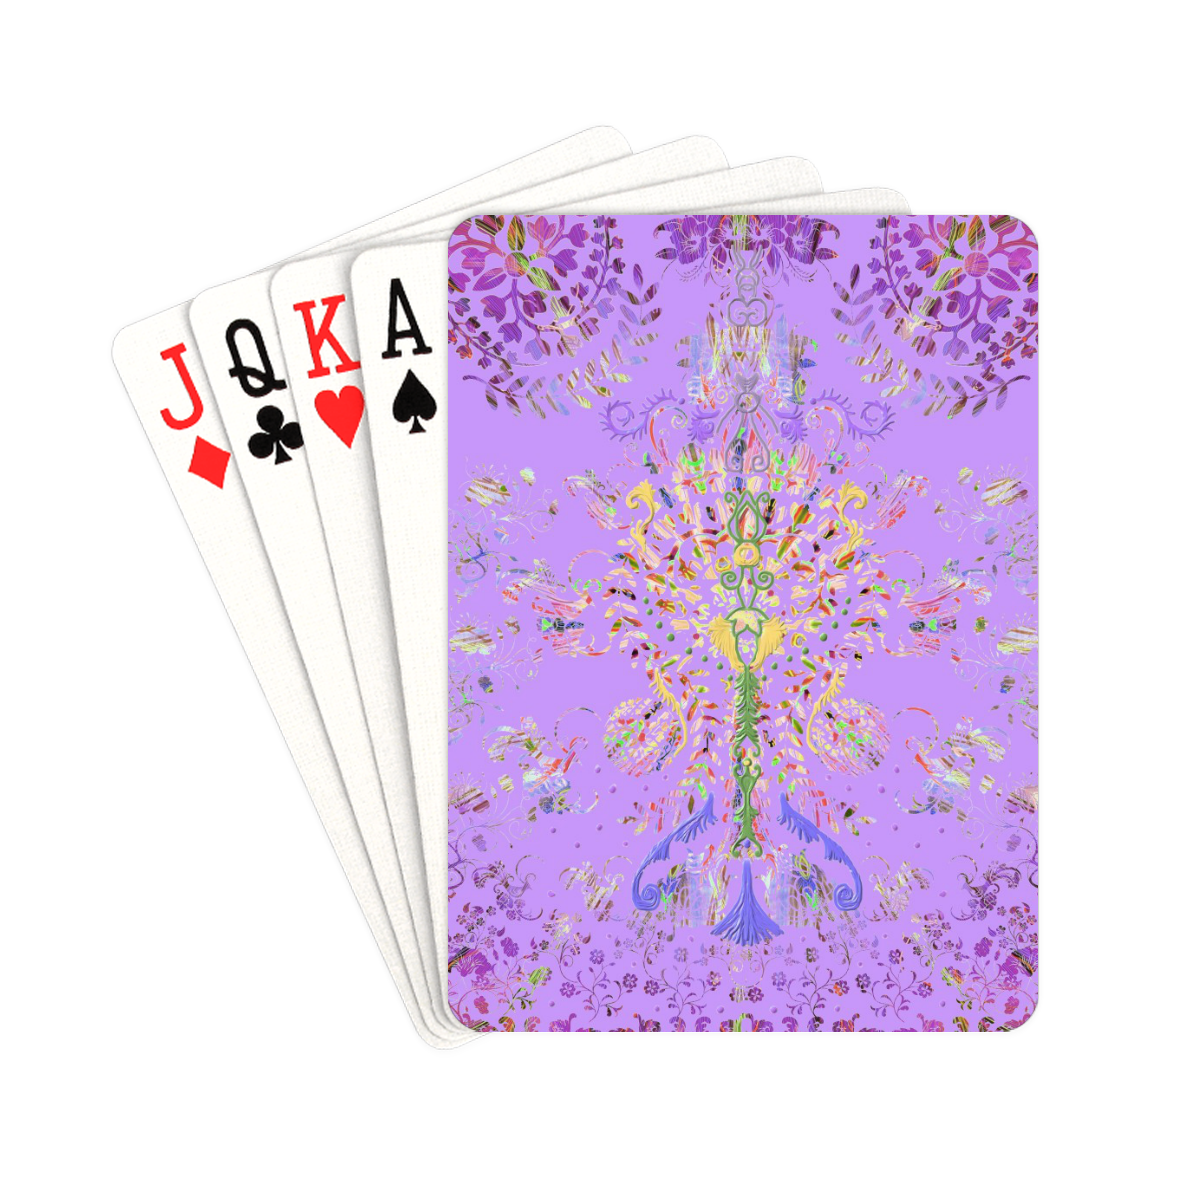 FRESCA 14 Playing Cards 2.5"x3.5"